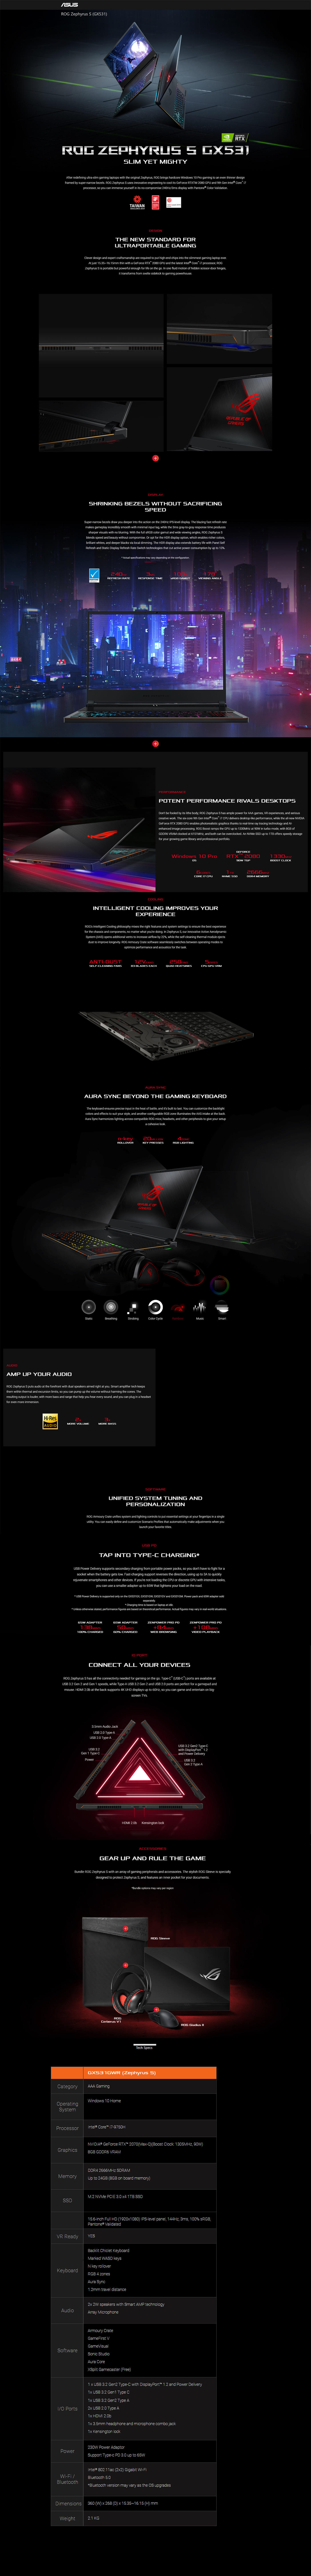 Buy OnlineAsus ROG Zephyrus S GX531GWR-ES024T 15.6inch 144Hz 3ms Gaming Laptop (Core i7-9750H, 16GB + (8GB on board), 1TB SSD, RTX 2070 with Max-Q 8GB, Windows